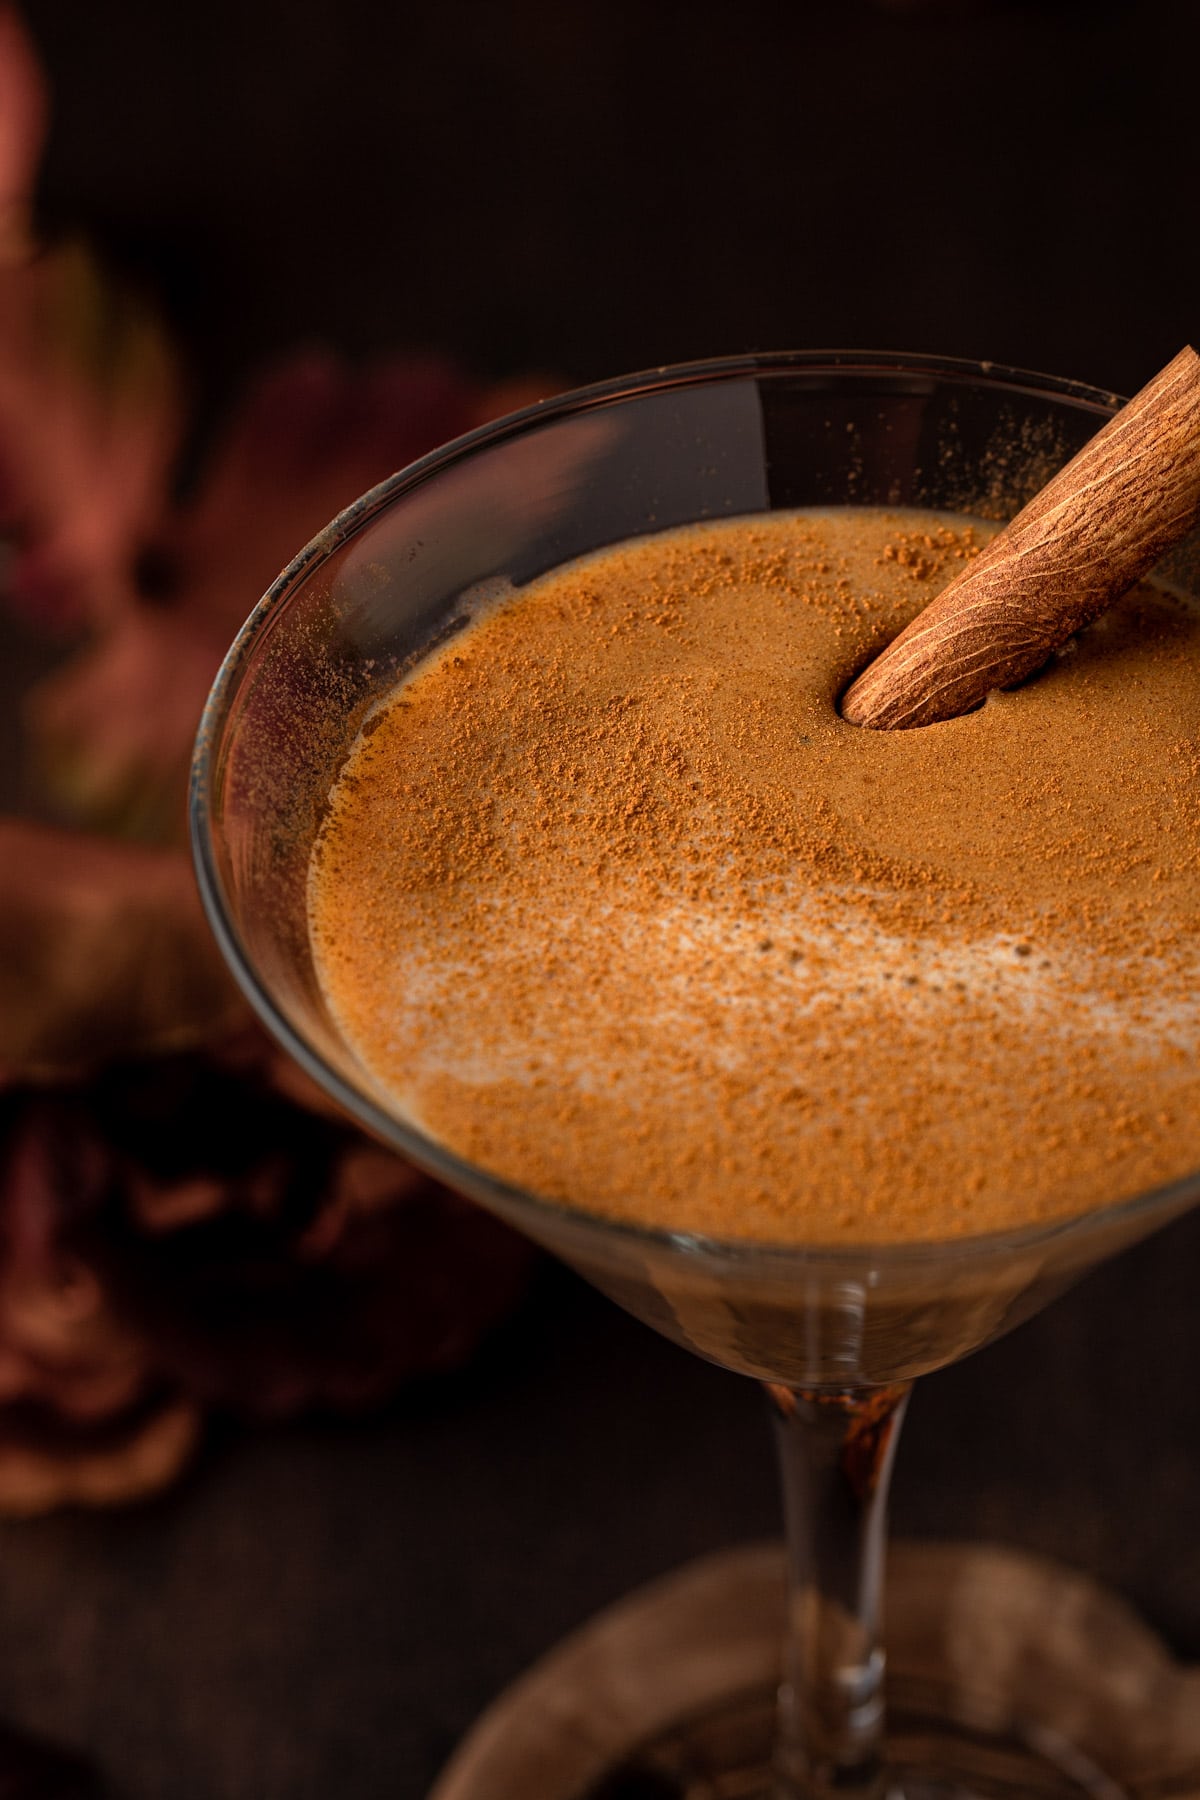 RumChata pumpkin martini garnished with pumpkin pie spice and a cinnamon stick, sitting on a wooden table.